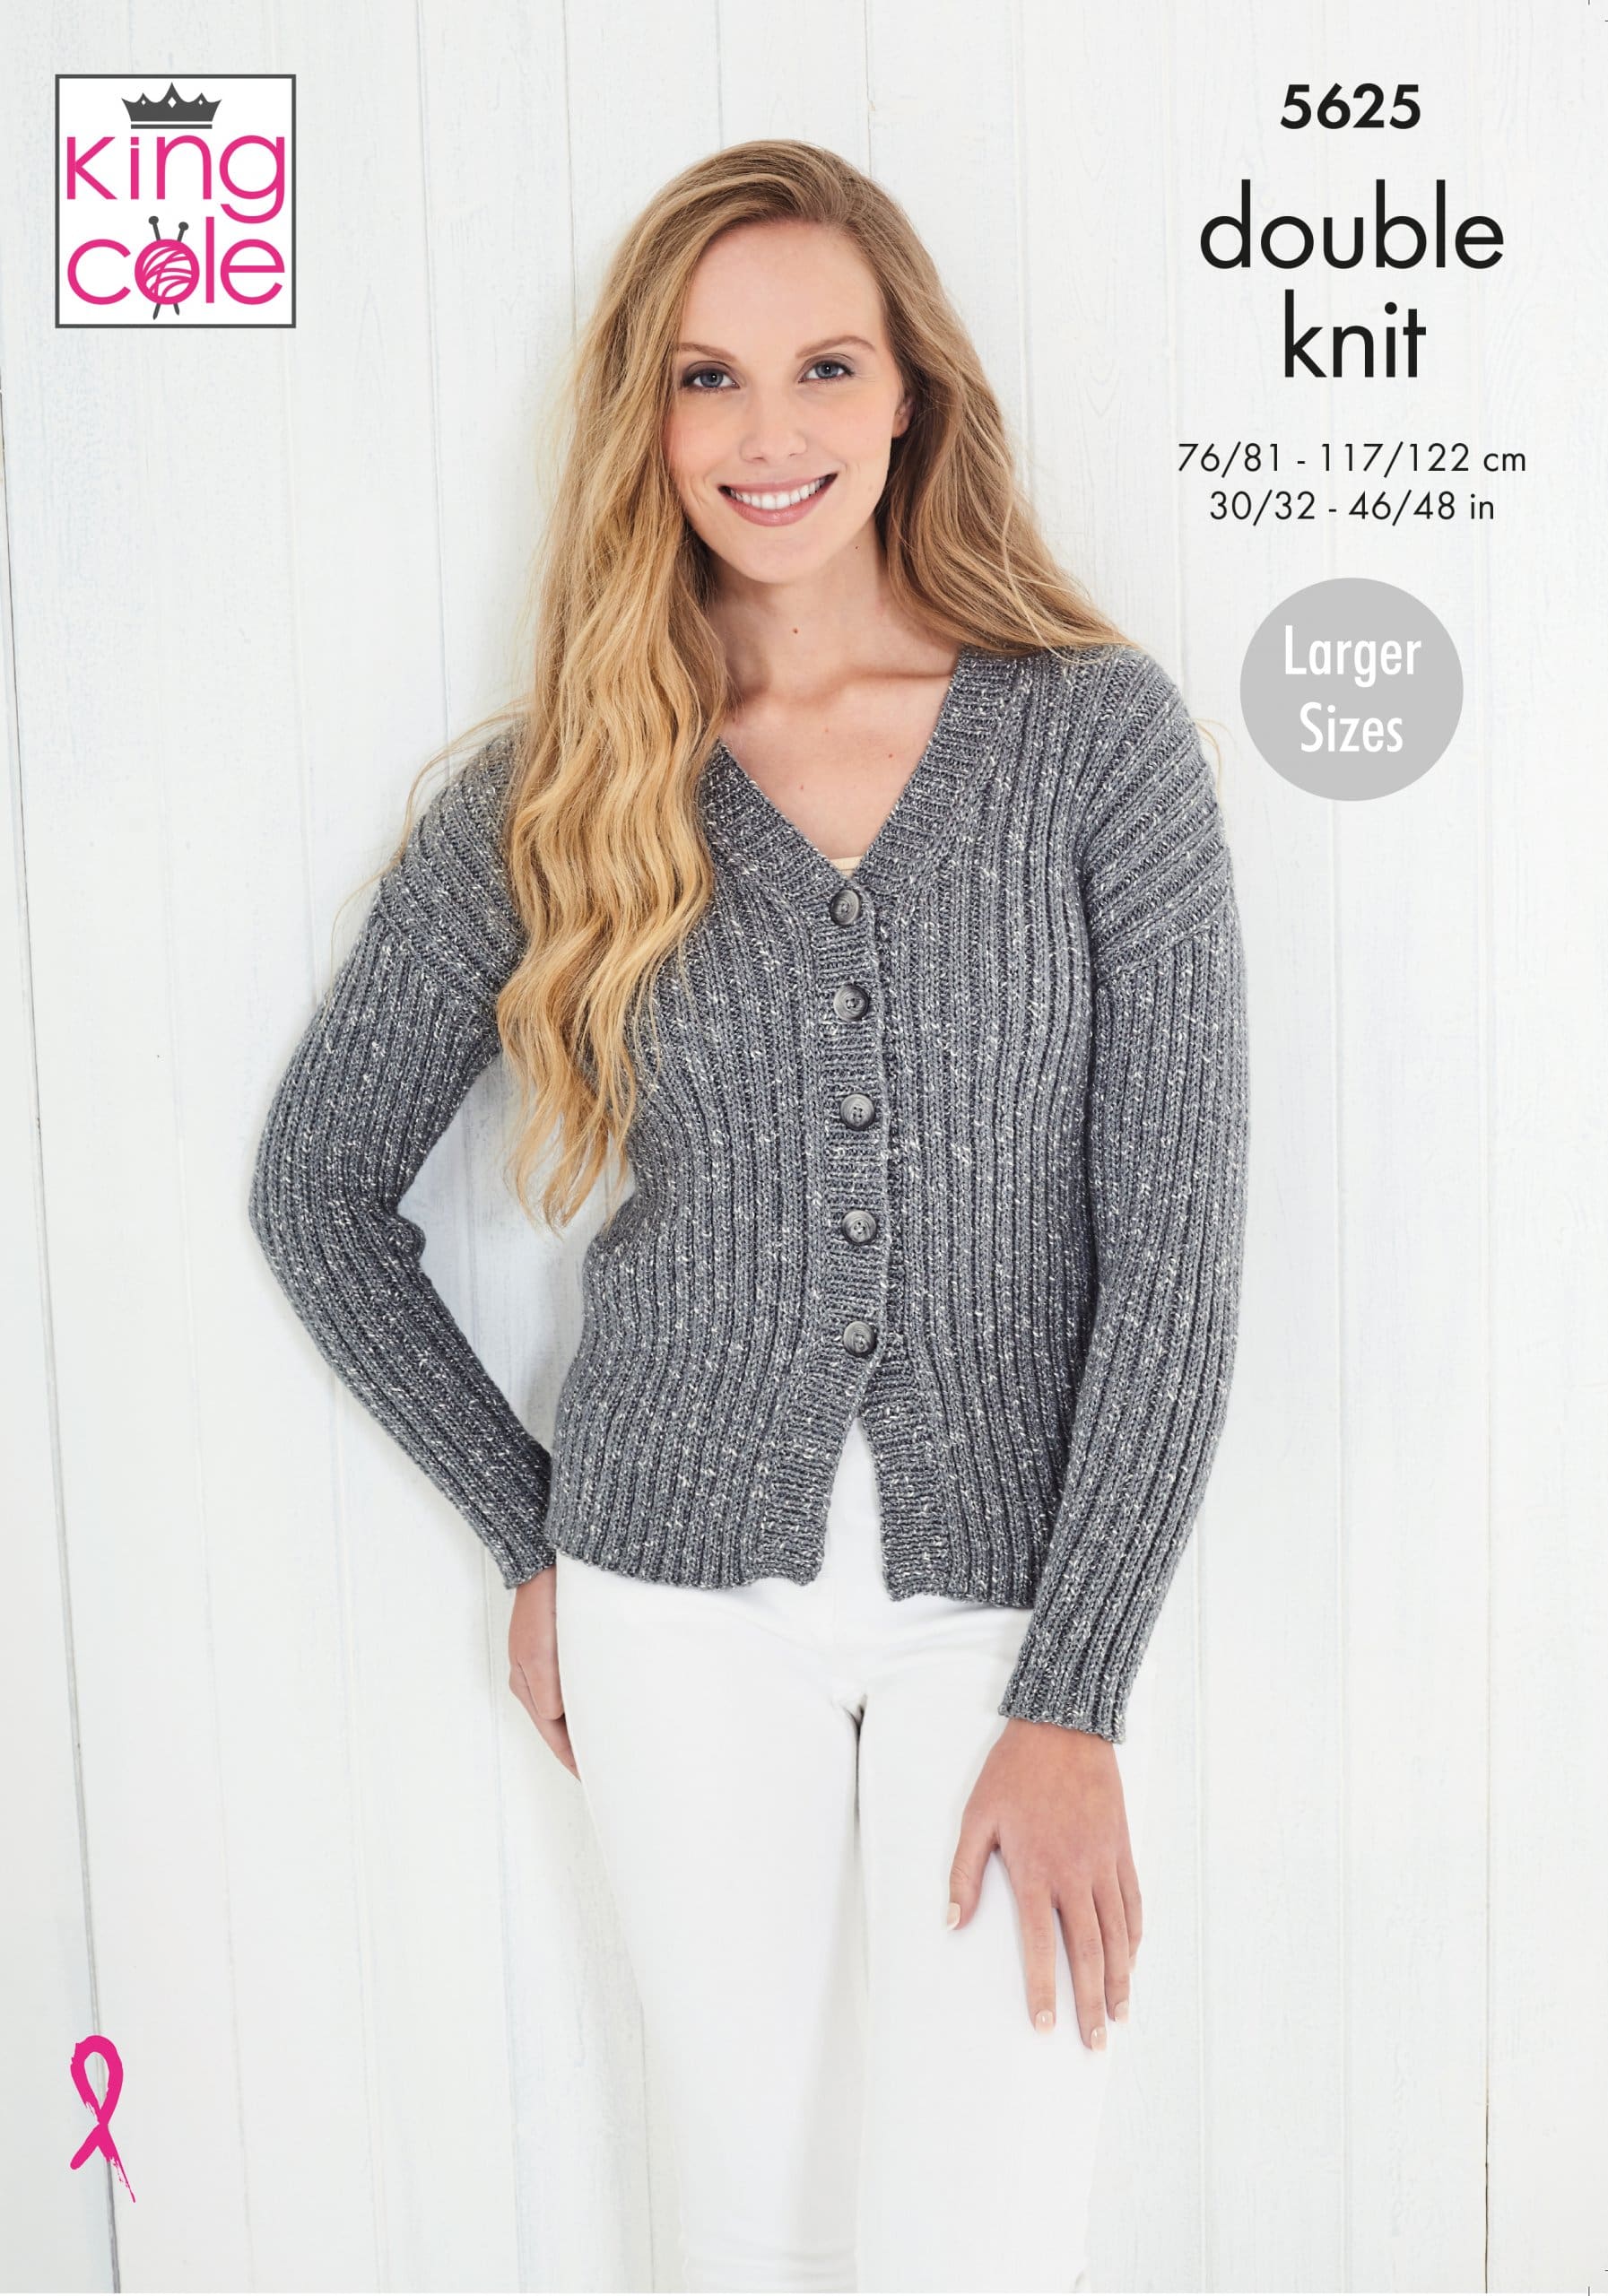 Easy to Follow Cardigan & Top Knitted in Cotton Top DK Knitting ...